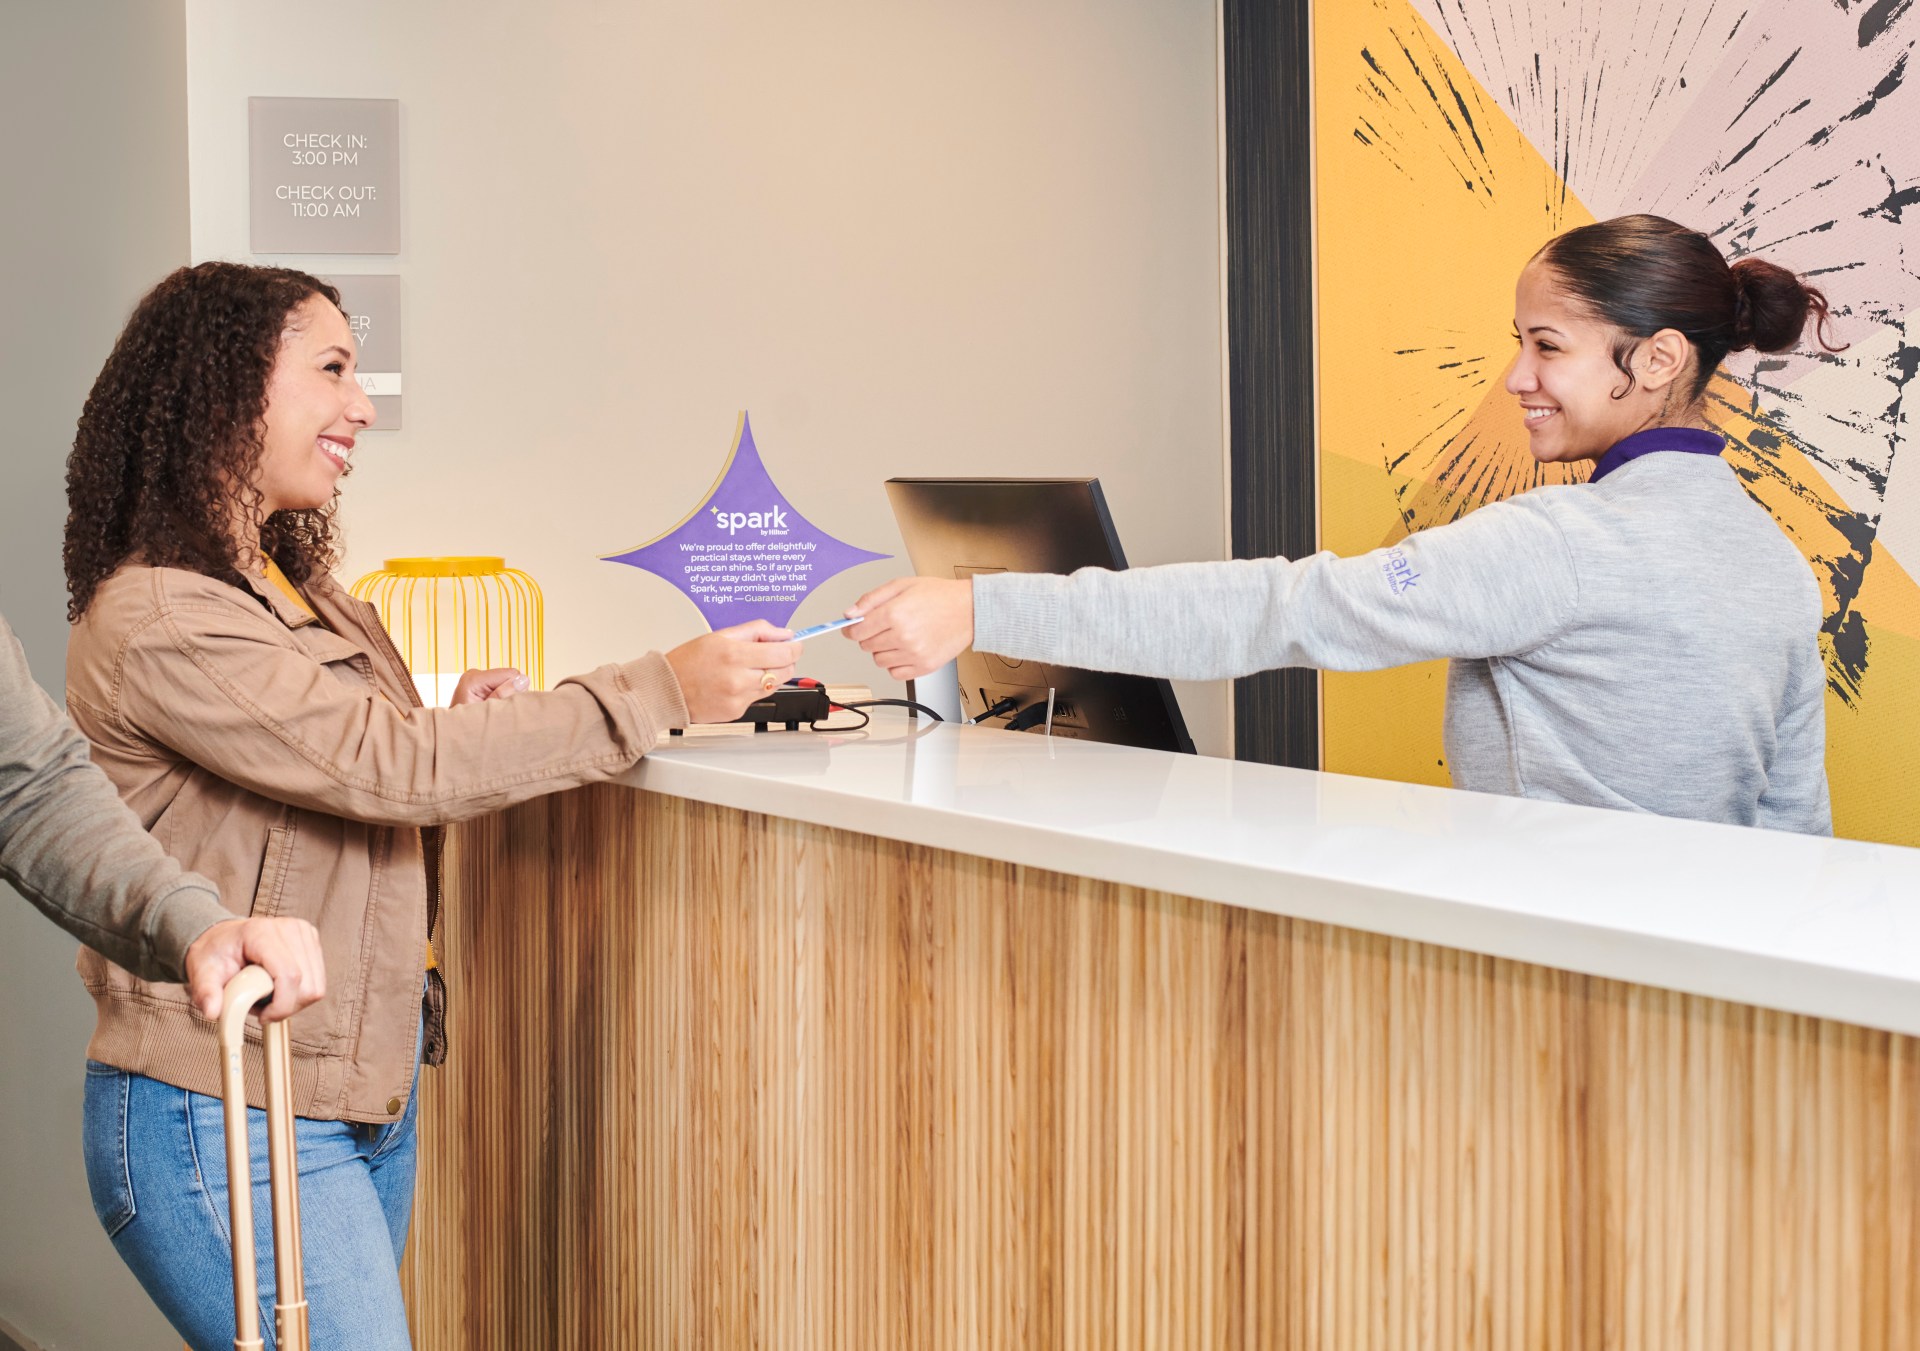 Spark by Hilton Mystic Groton - Grand Opening Guest Check-In